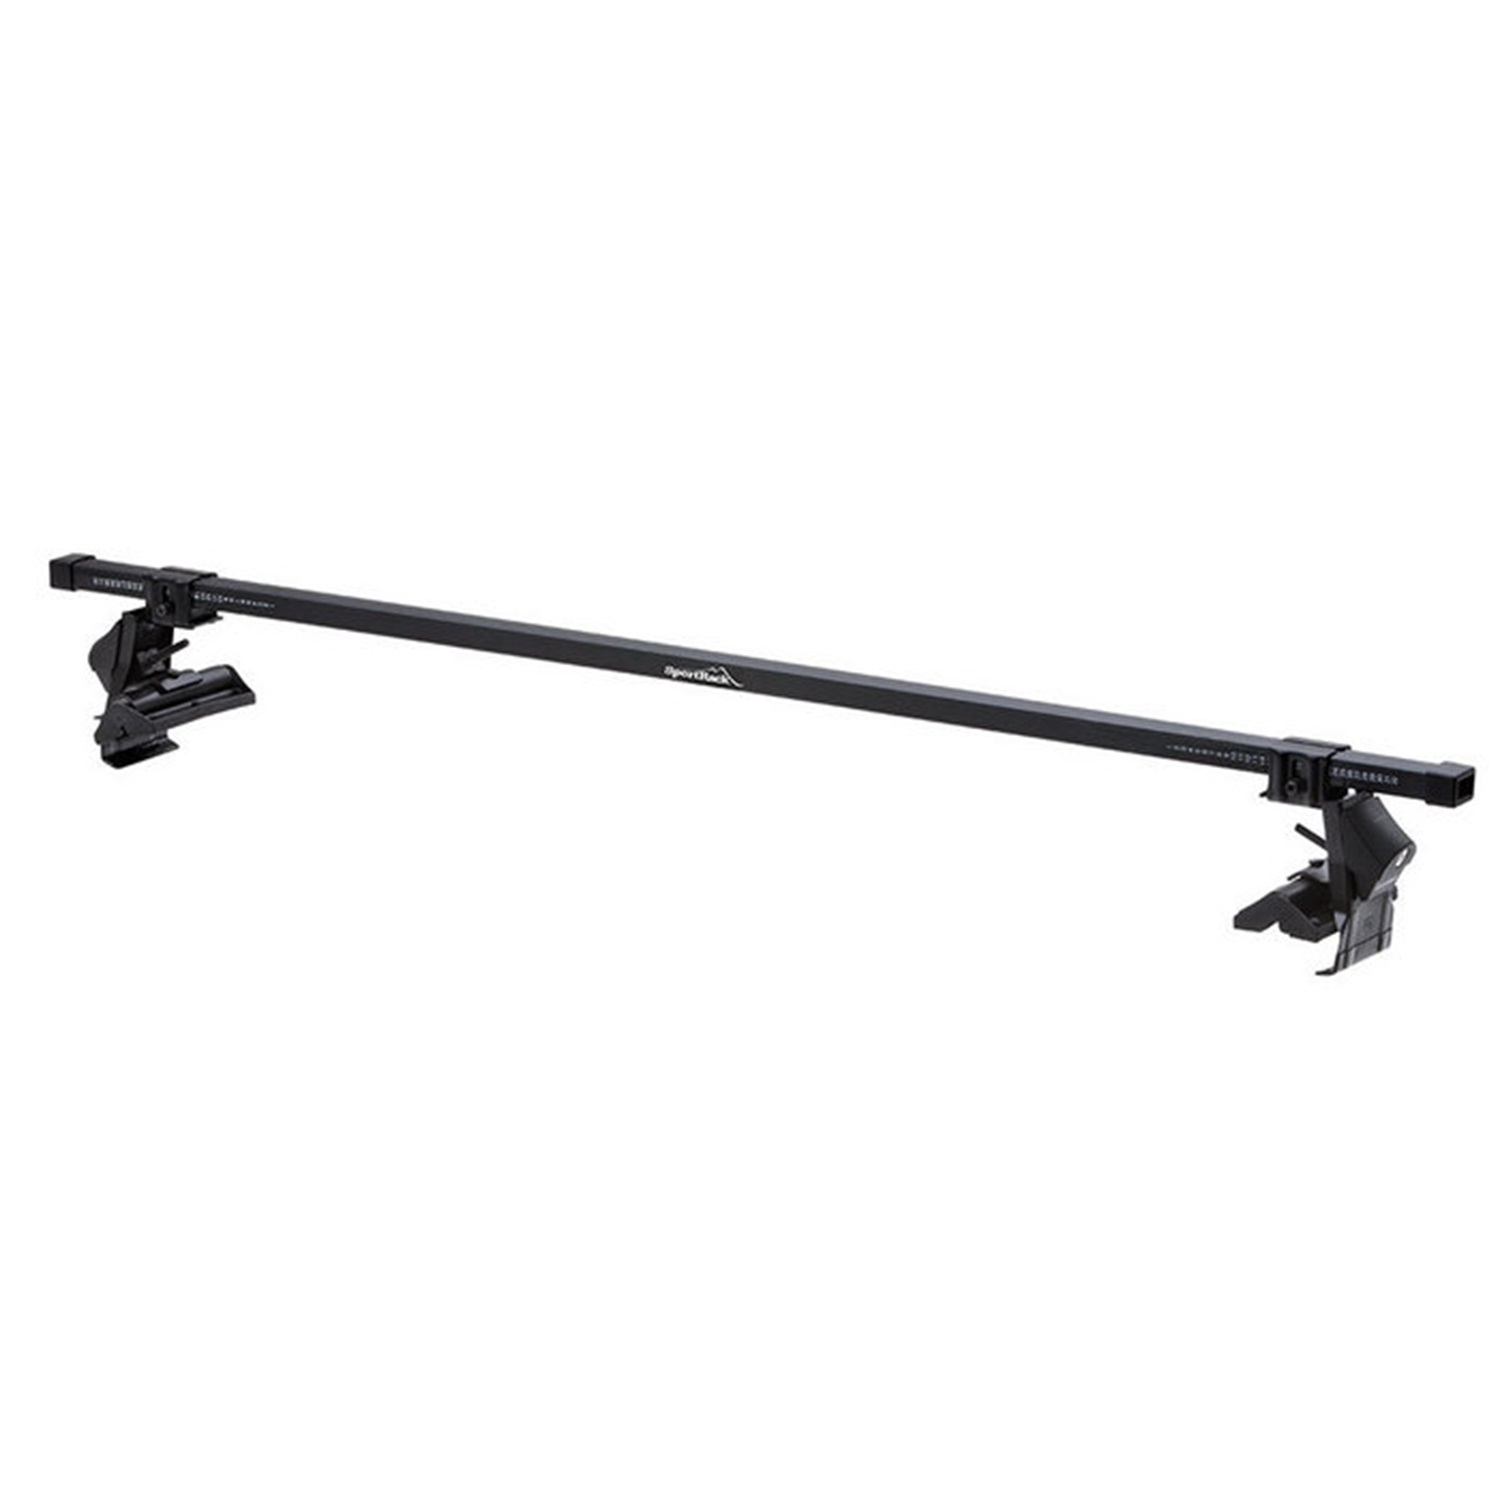 Thule Thule SR1001 SportRack Complete Roof Rack System